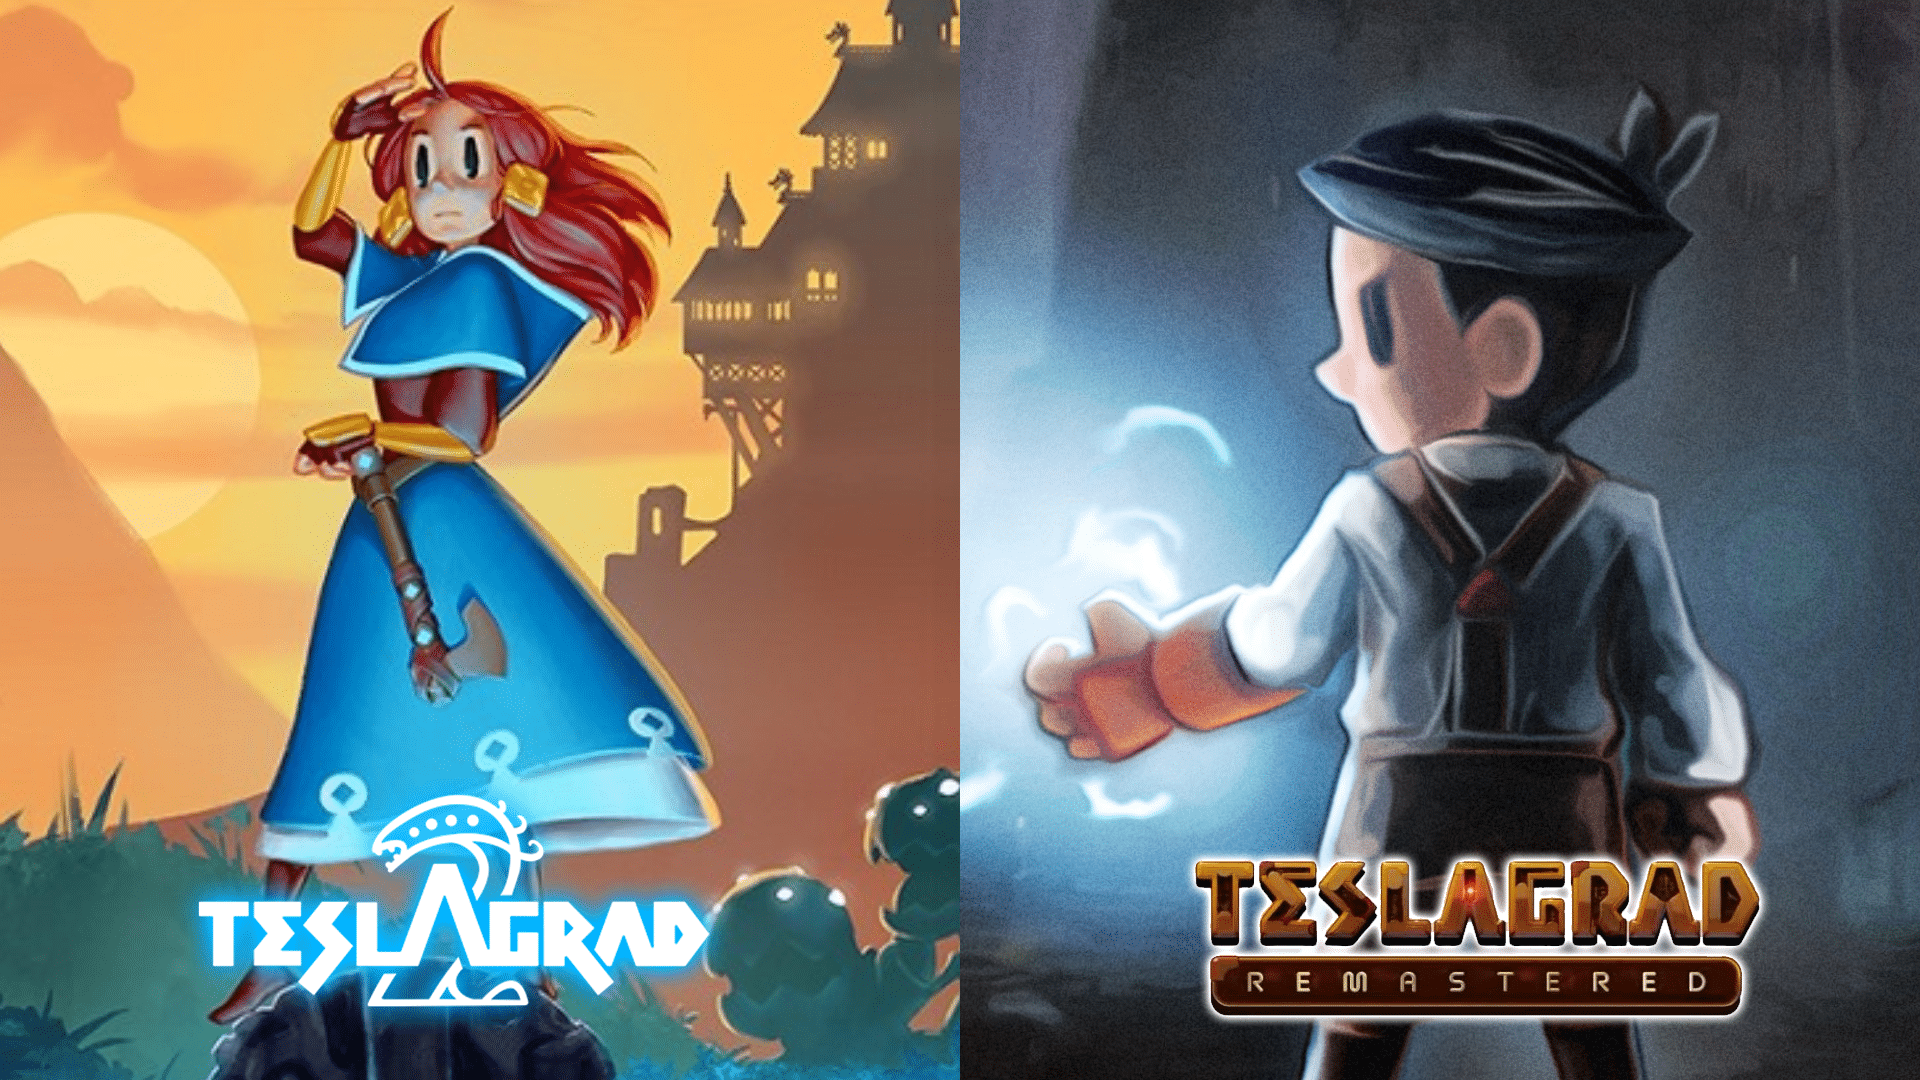 Teslagrad 2 & Teslagrad Remastered Now Available on Console & PC; Launch Trailer